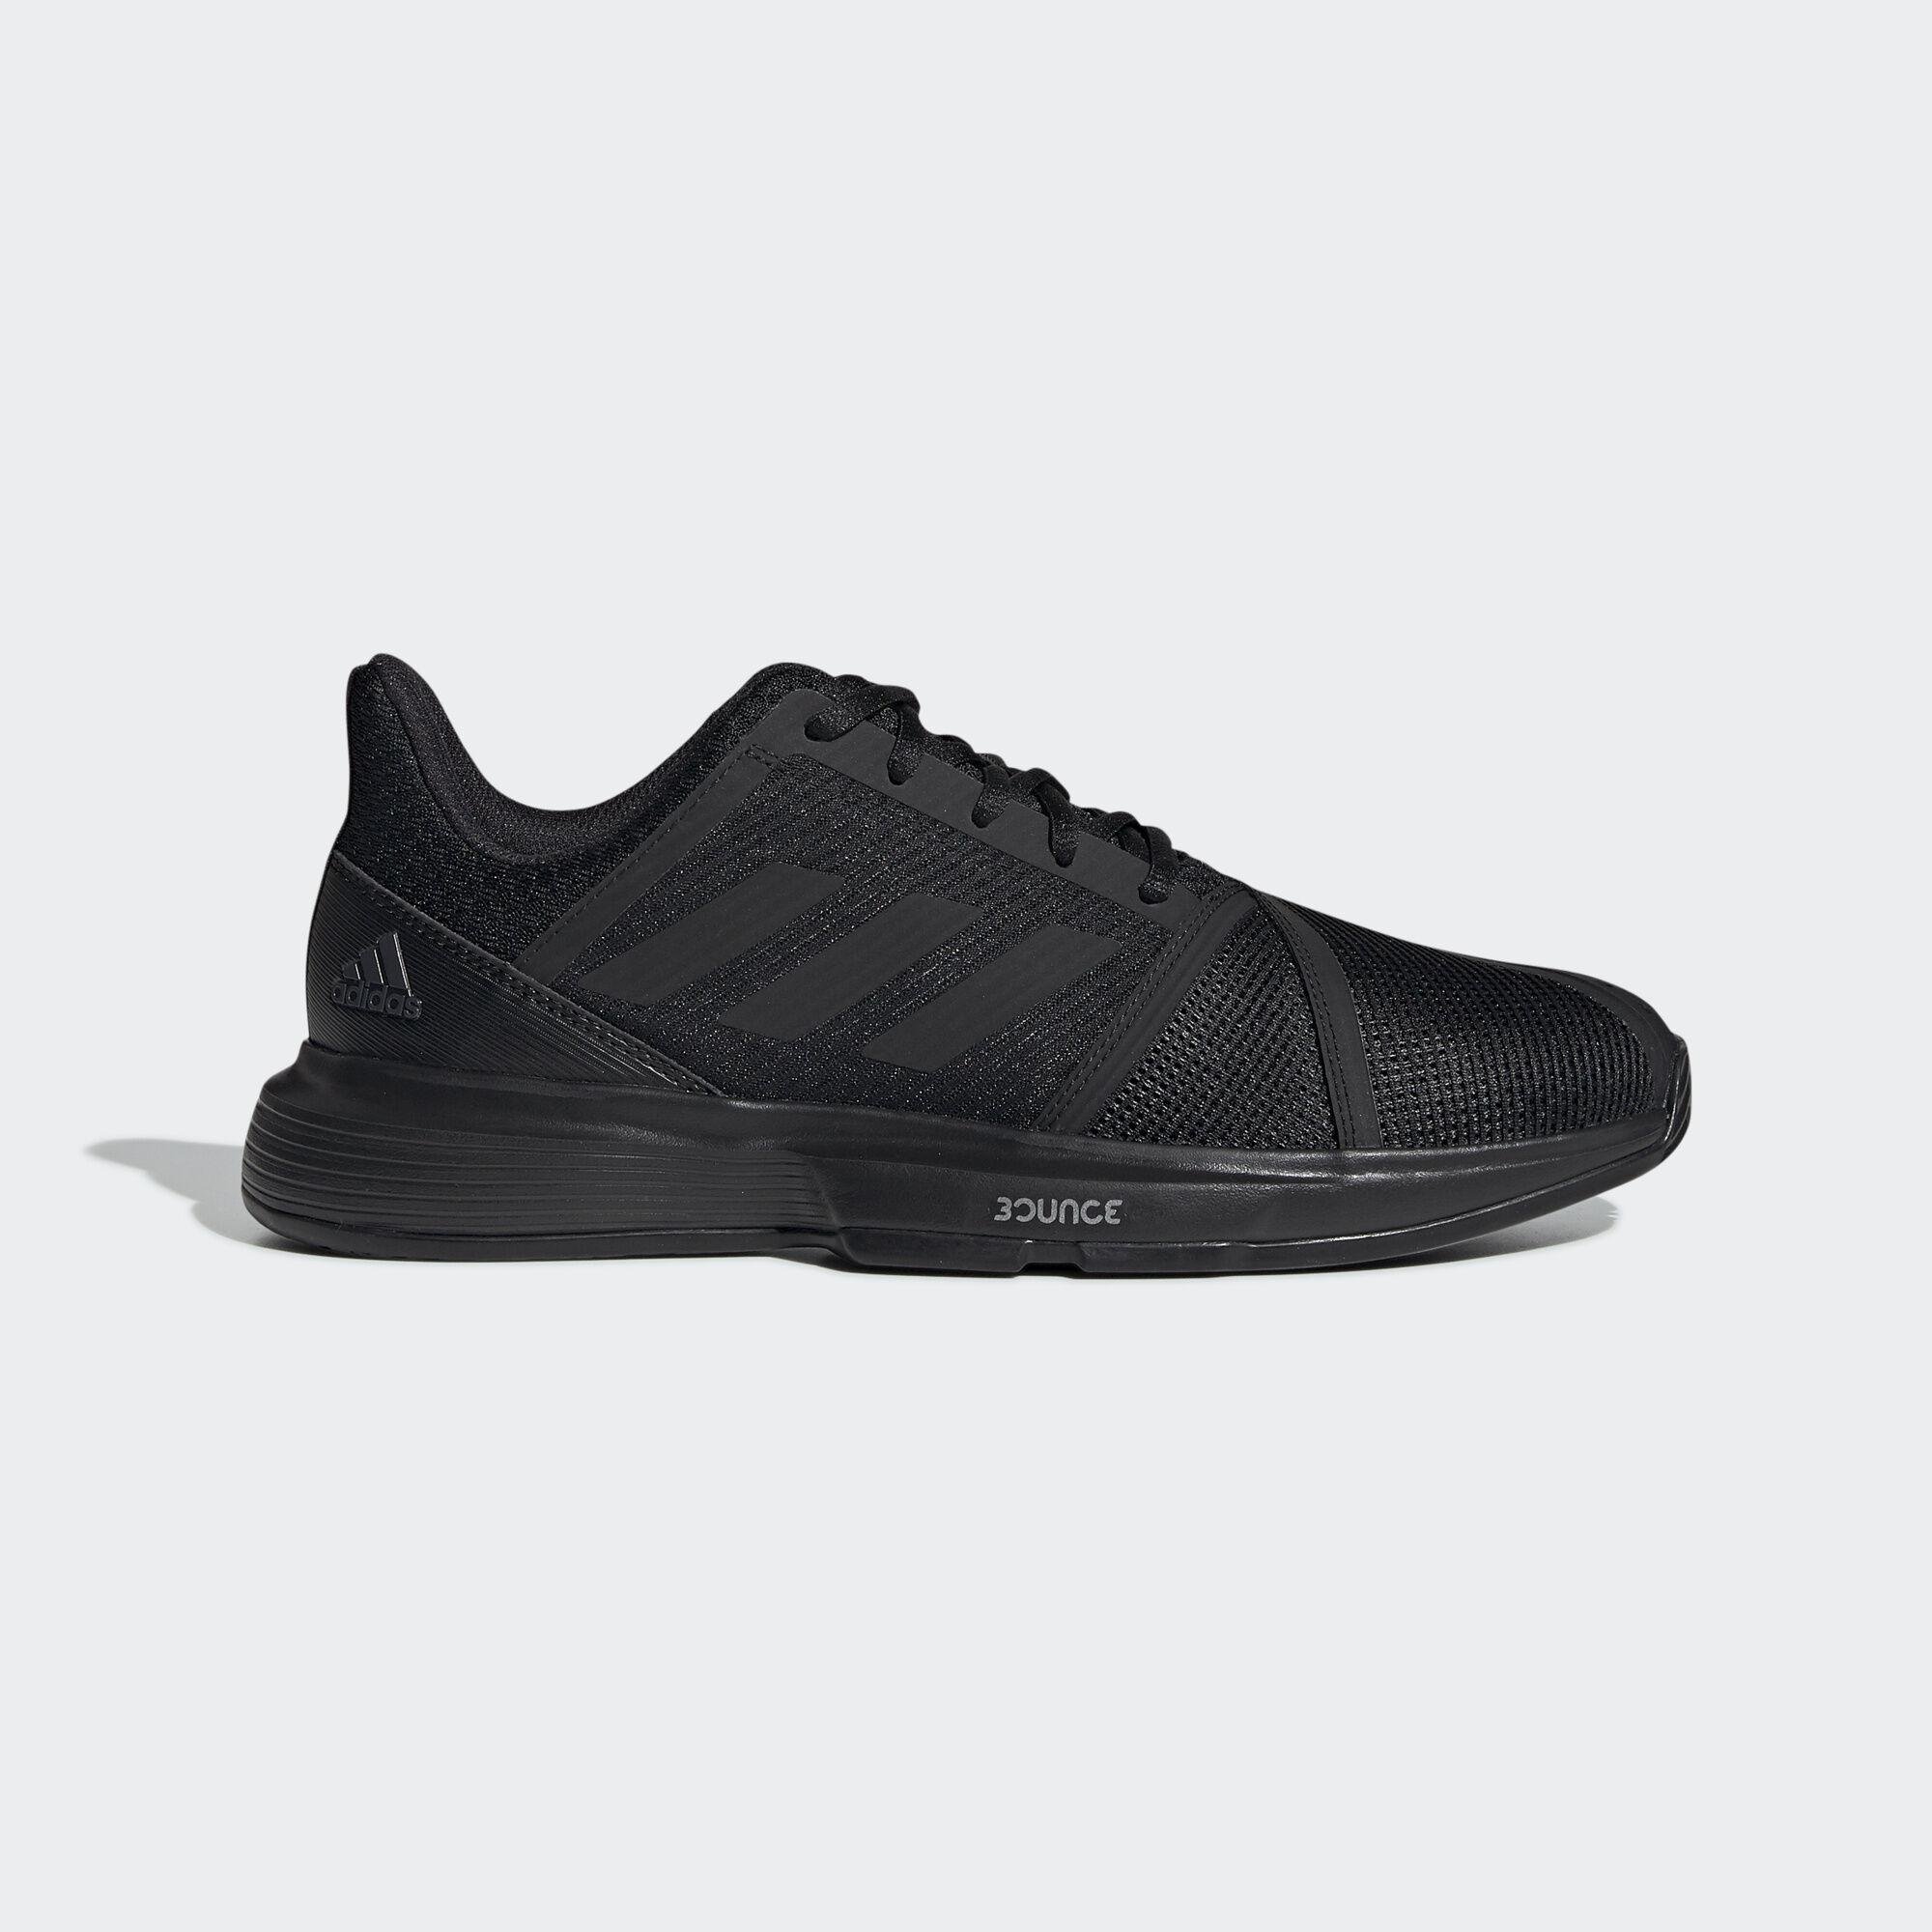 Adidas Mens CourtJam Bounce Tennis Shoes - All Black